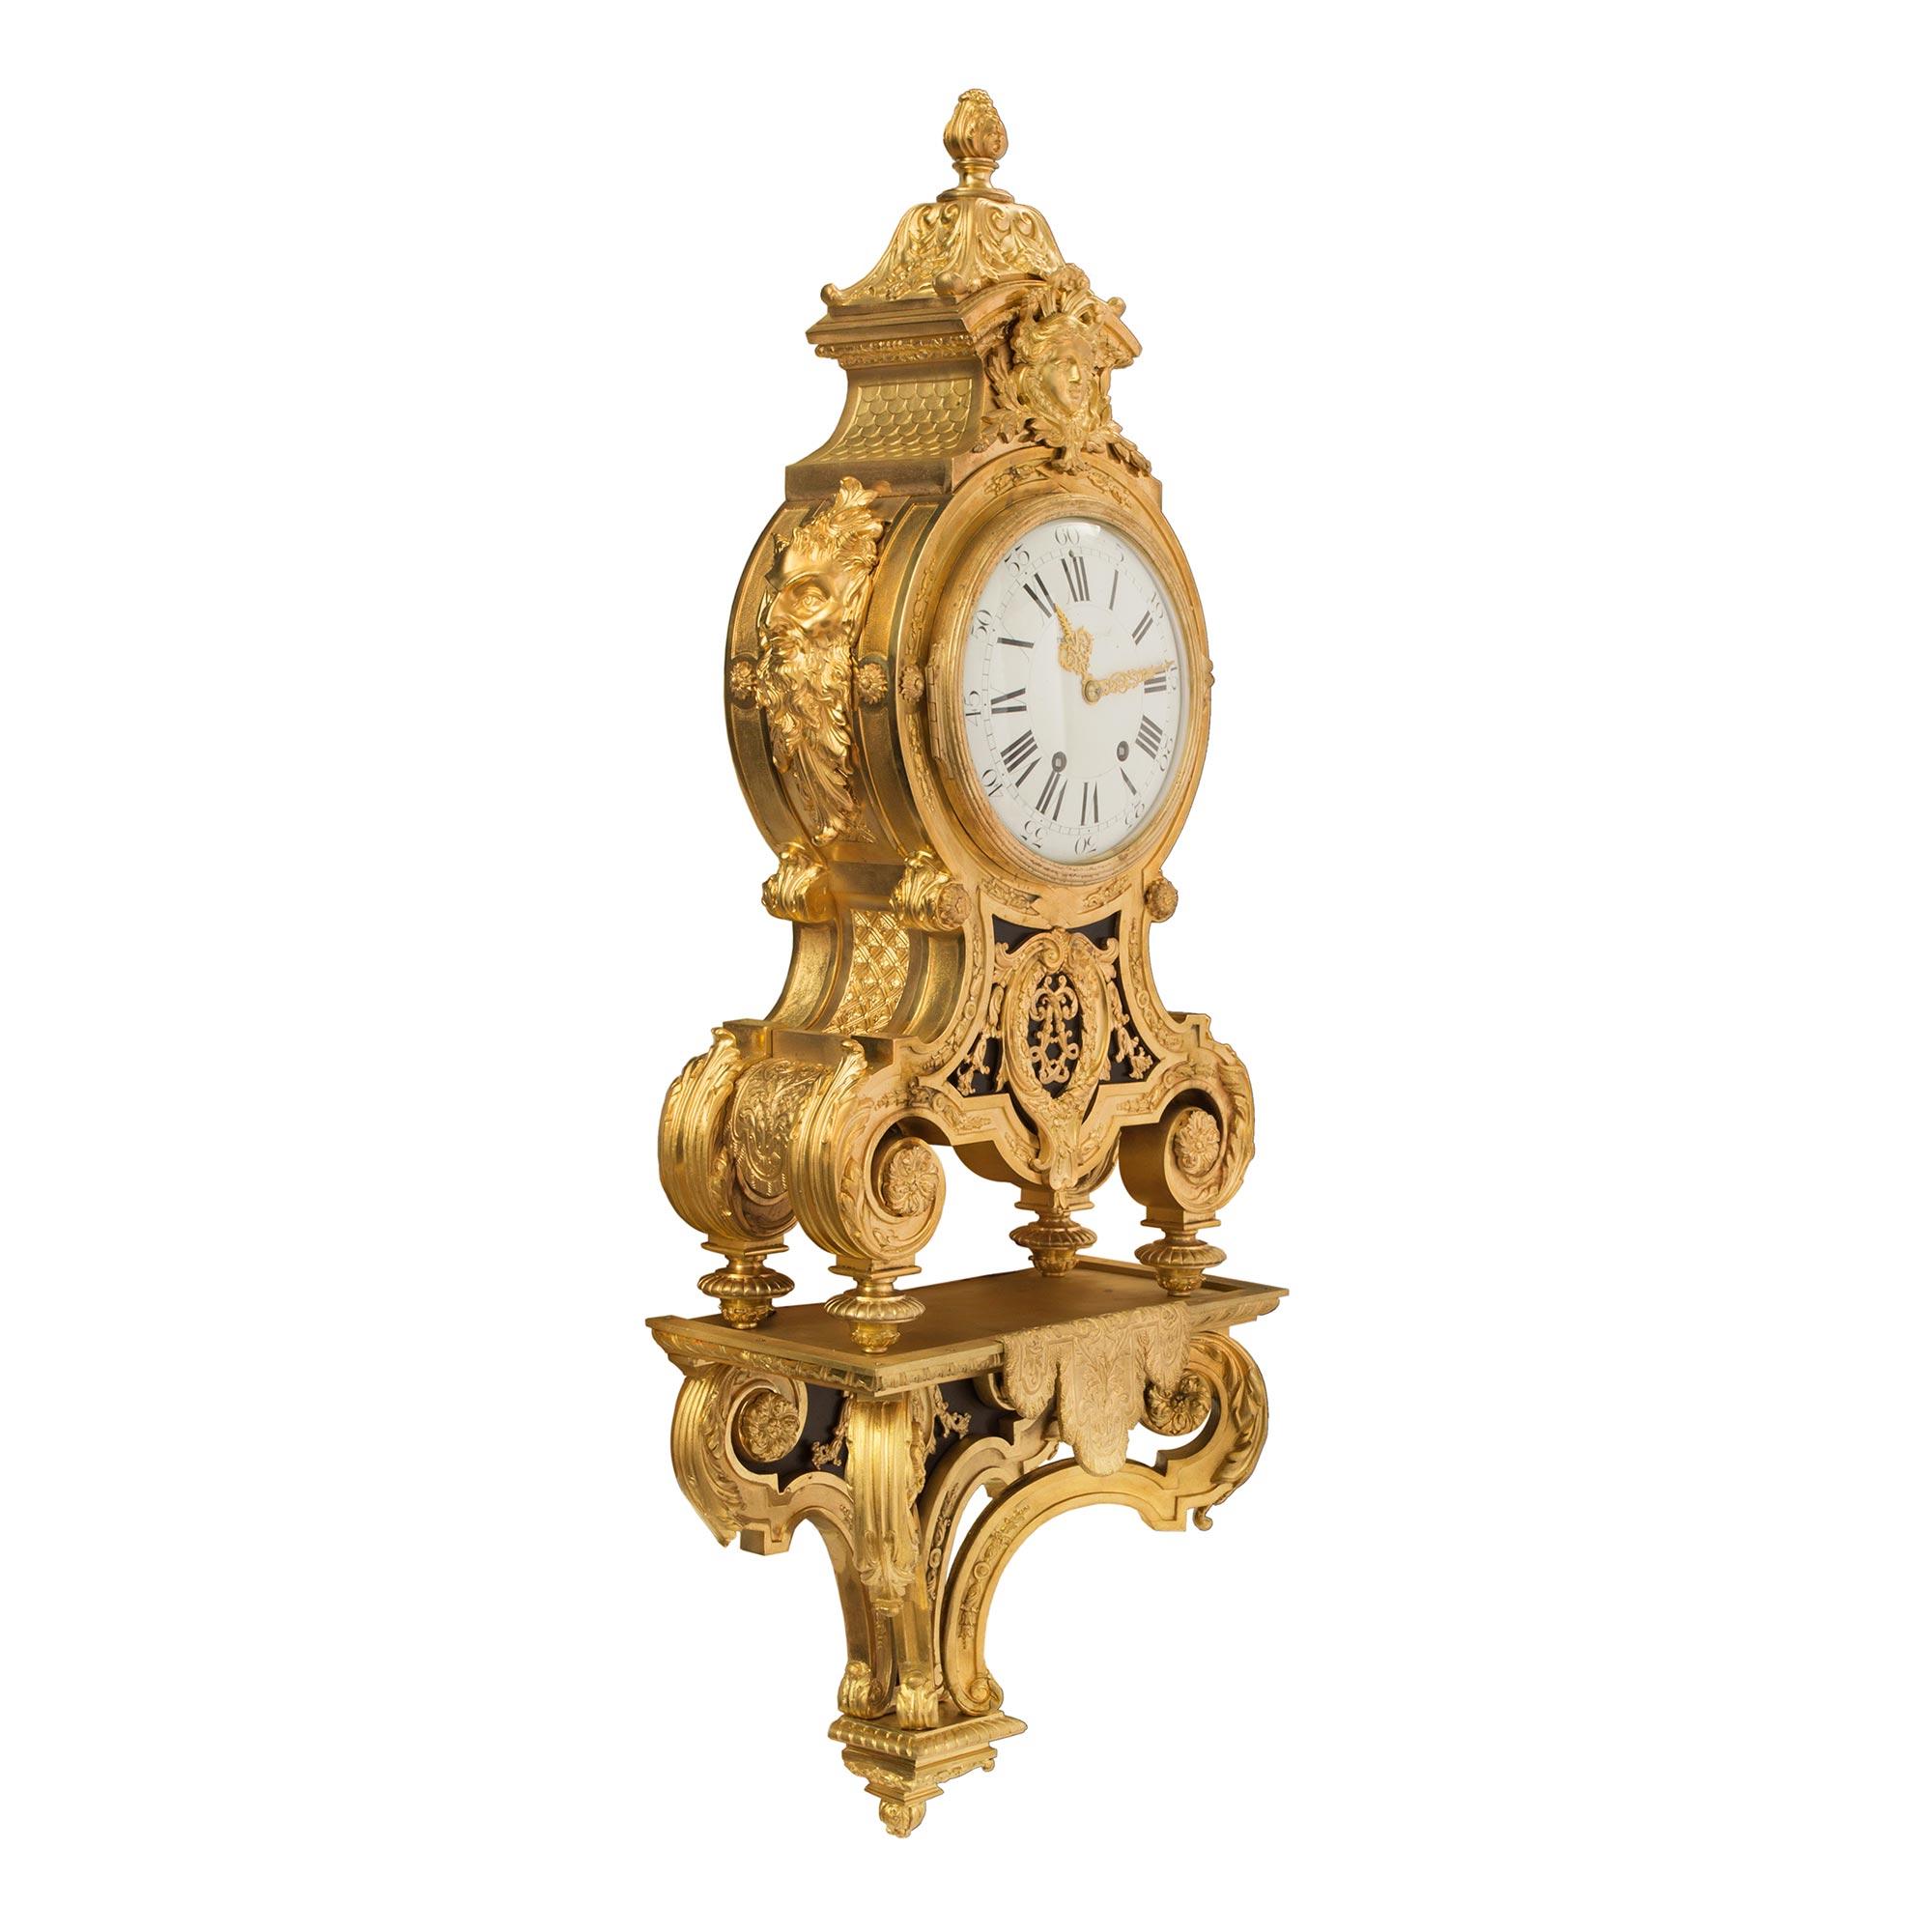 A most impressive and high quality French 19th century Louis XIV st. ormolu cartel clock. The clock is raised on its original wall mounting stand with a lovely foliate bottom finial and elegant scrolled tapered movements. Adorned with finely chased